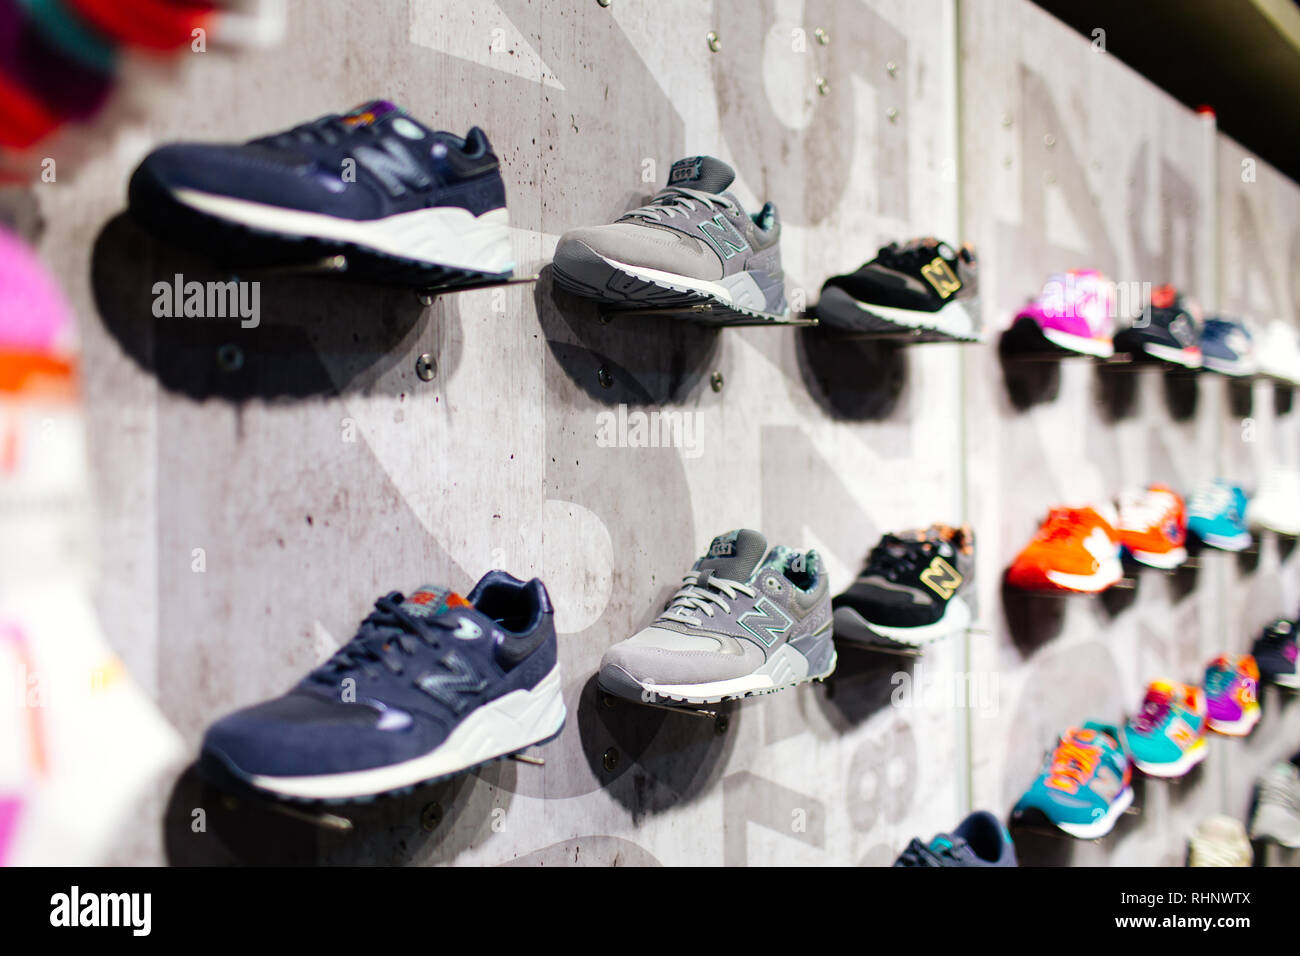 Page 2 - New Balance Trainers High Resolution Stock Photography and Images  - Alamy